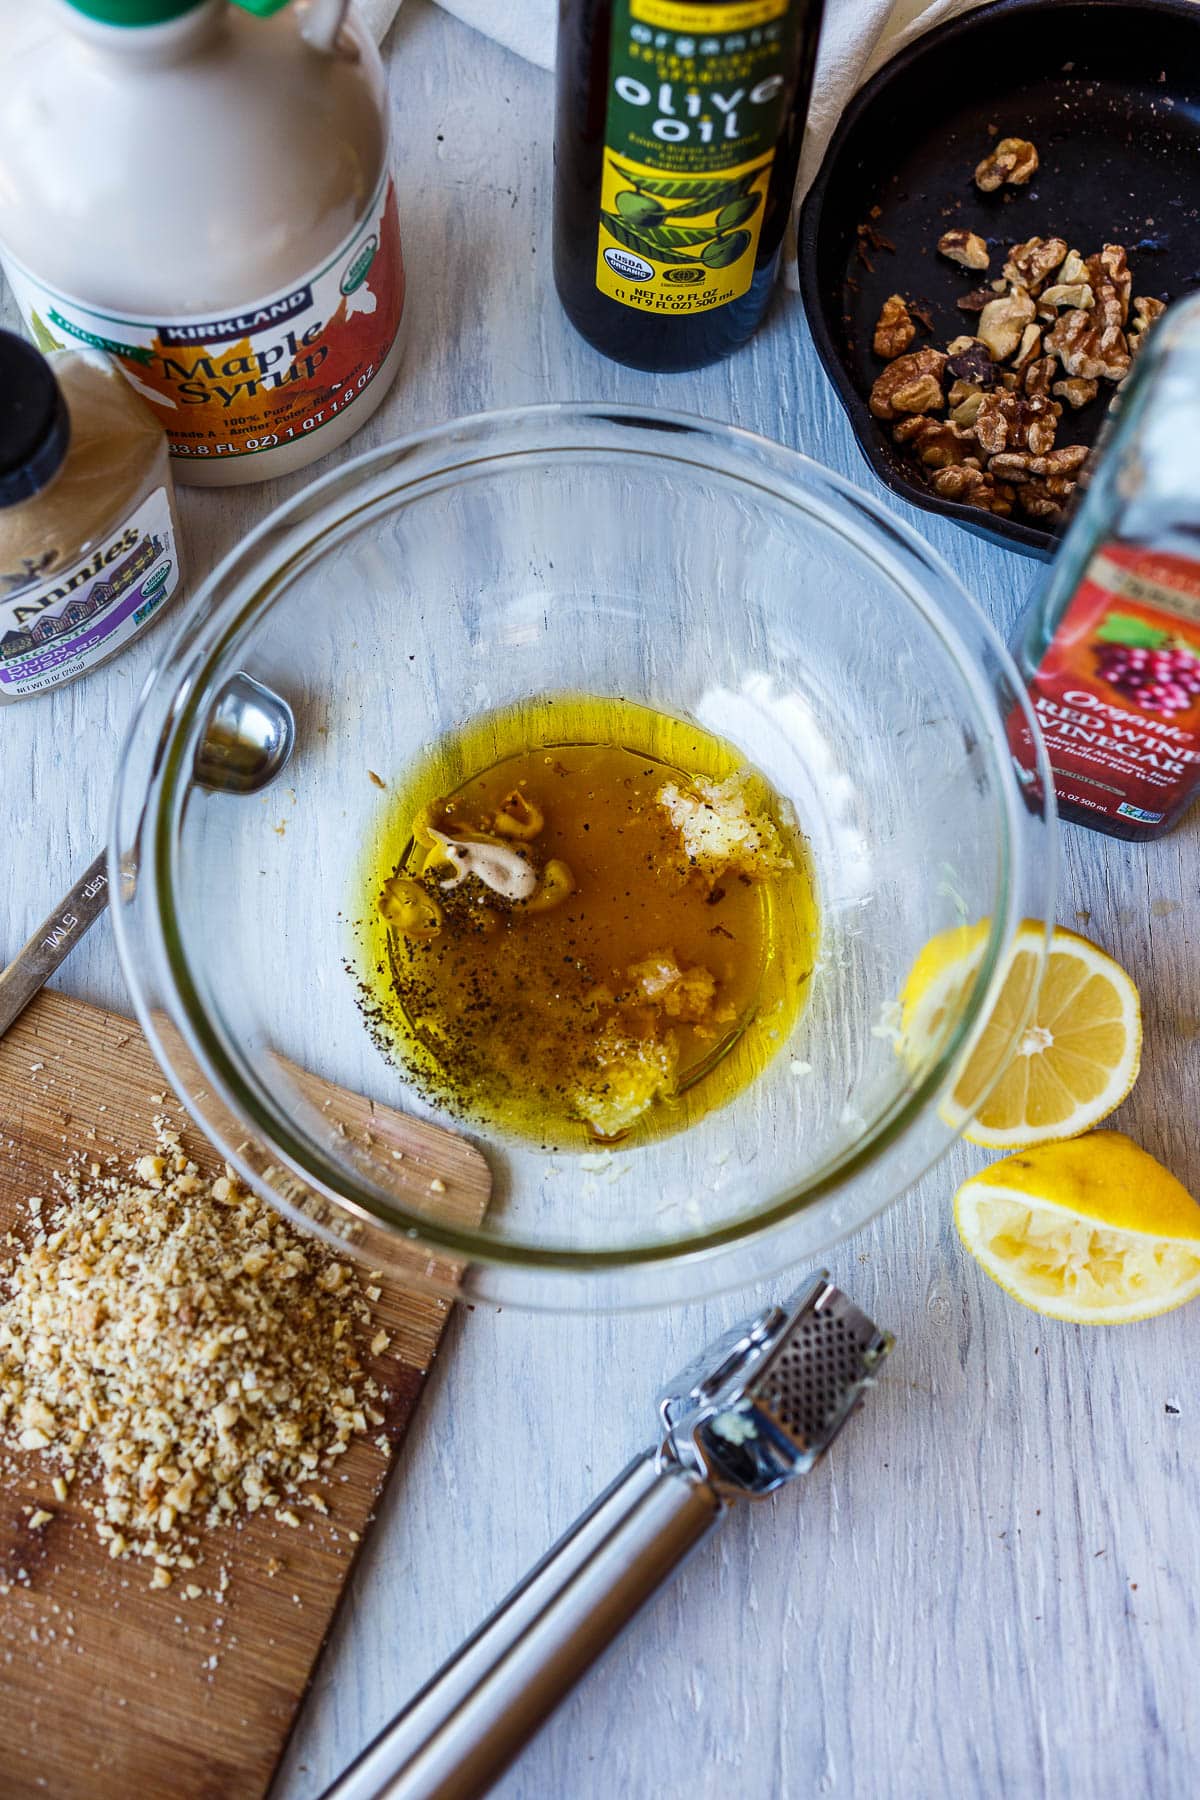 Whisking all ingredients together in a glass bowl for the toasted walnut vinaigrette.